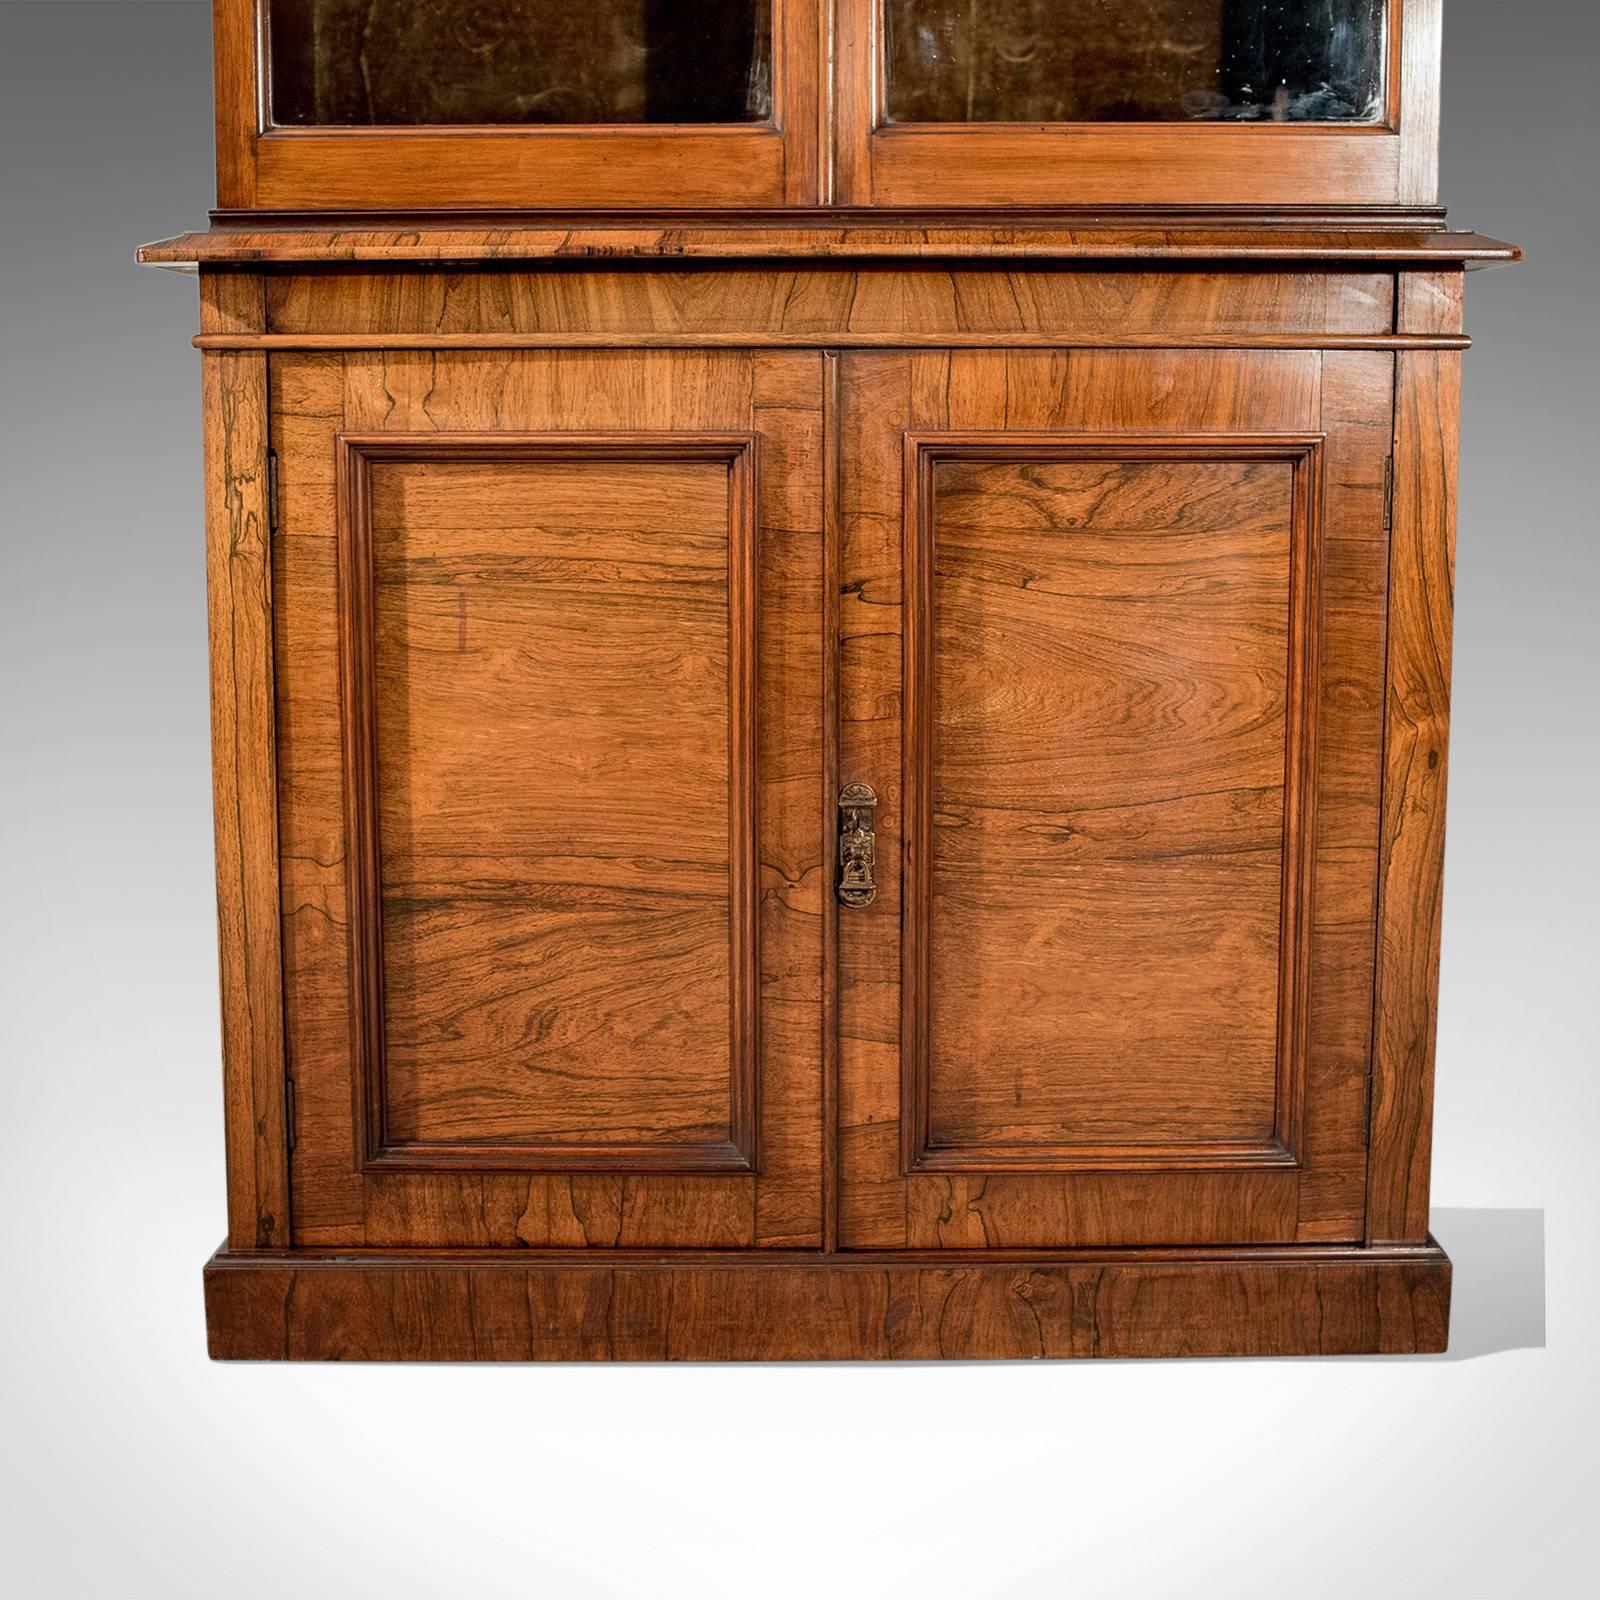 Wood Antique Display Cabinet, Tall, Victorian, Bookcase, Circa 1900